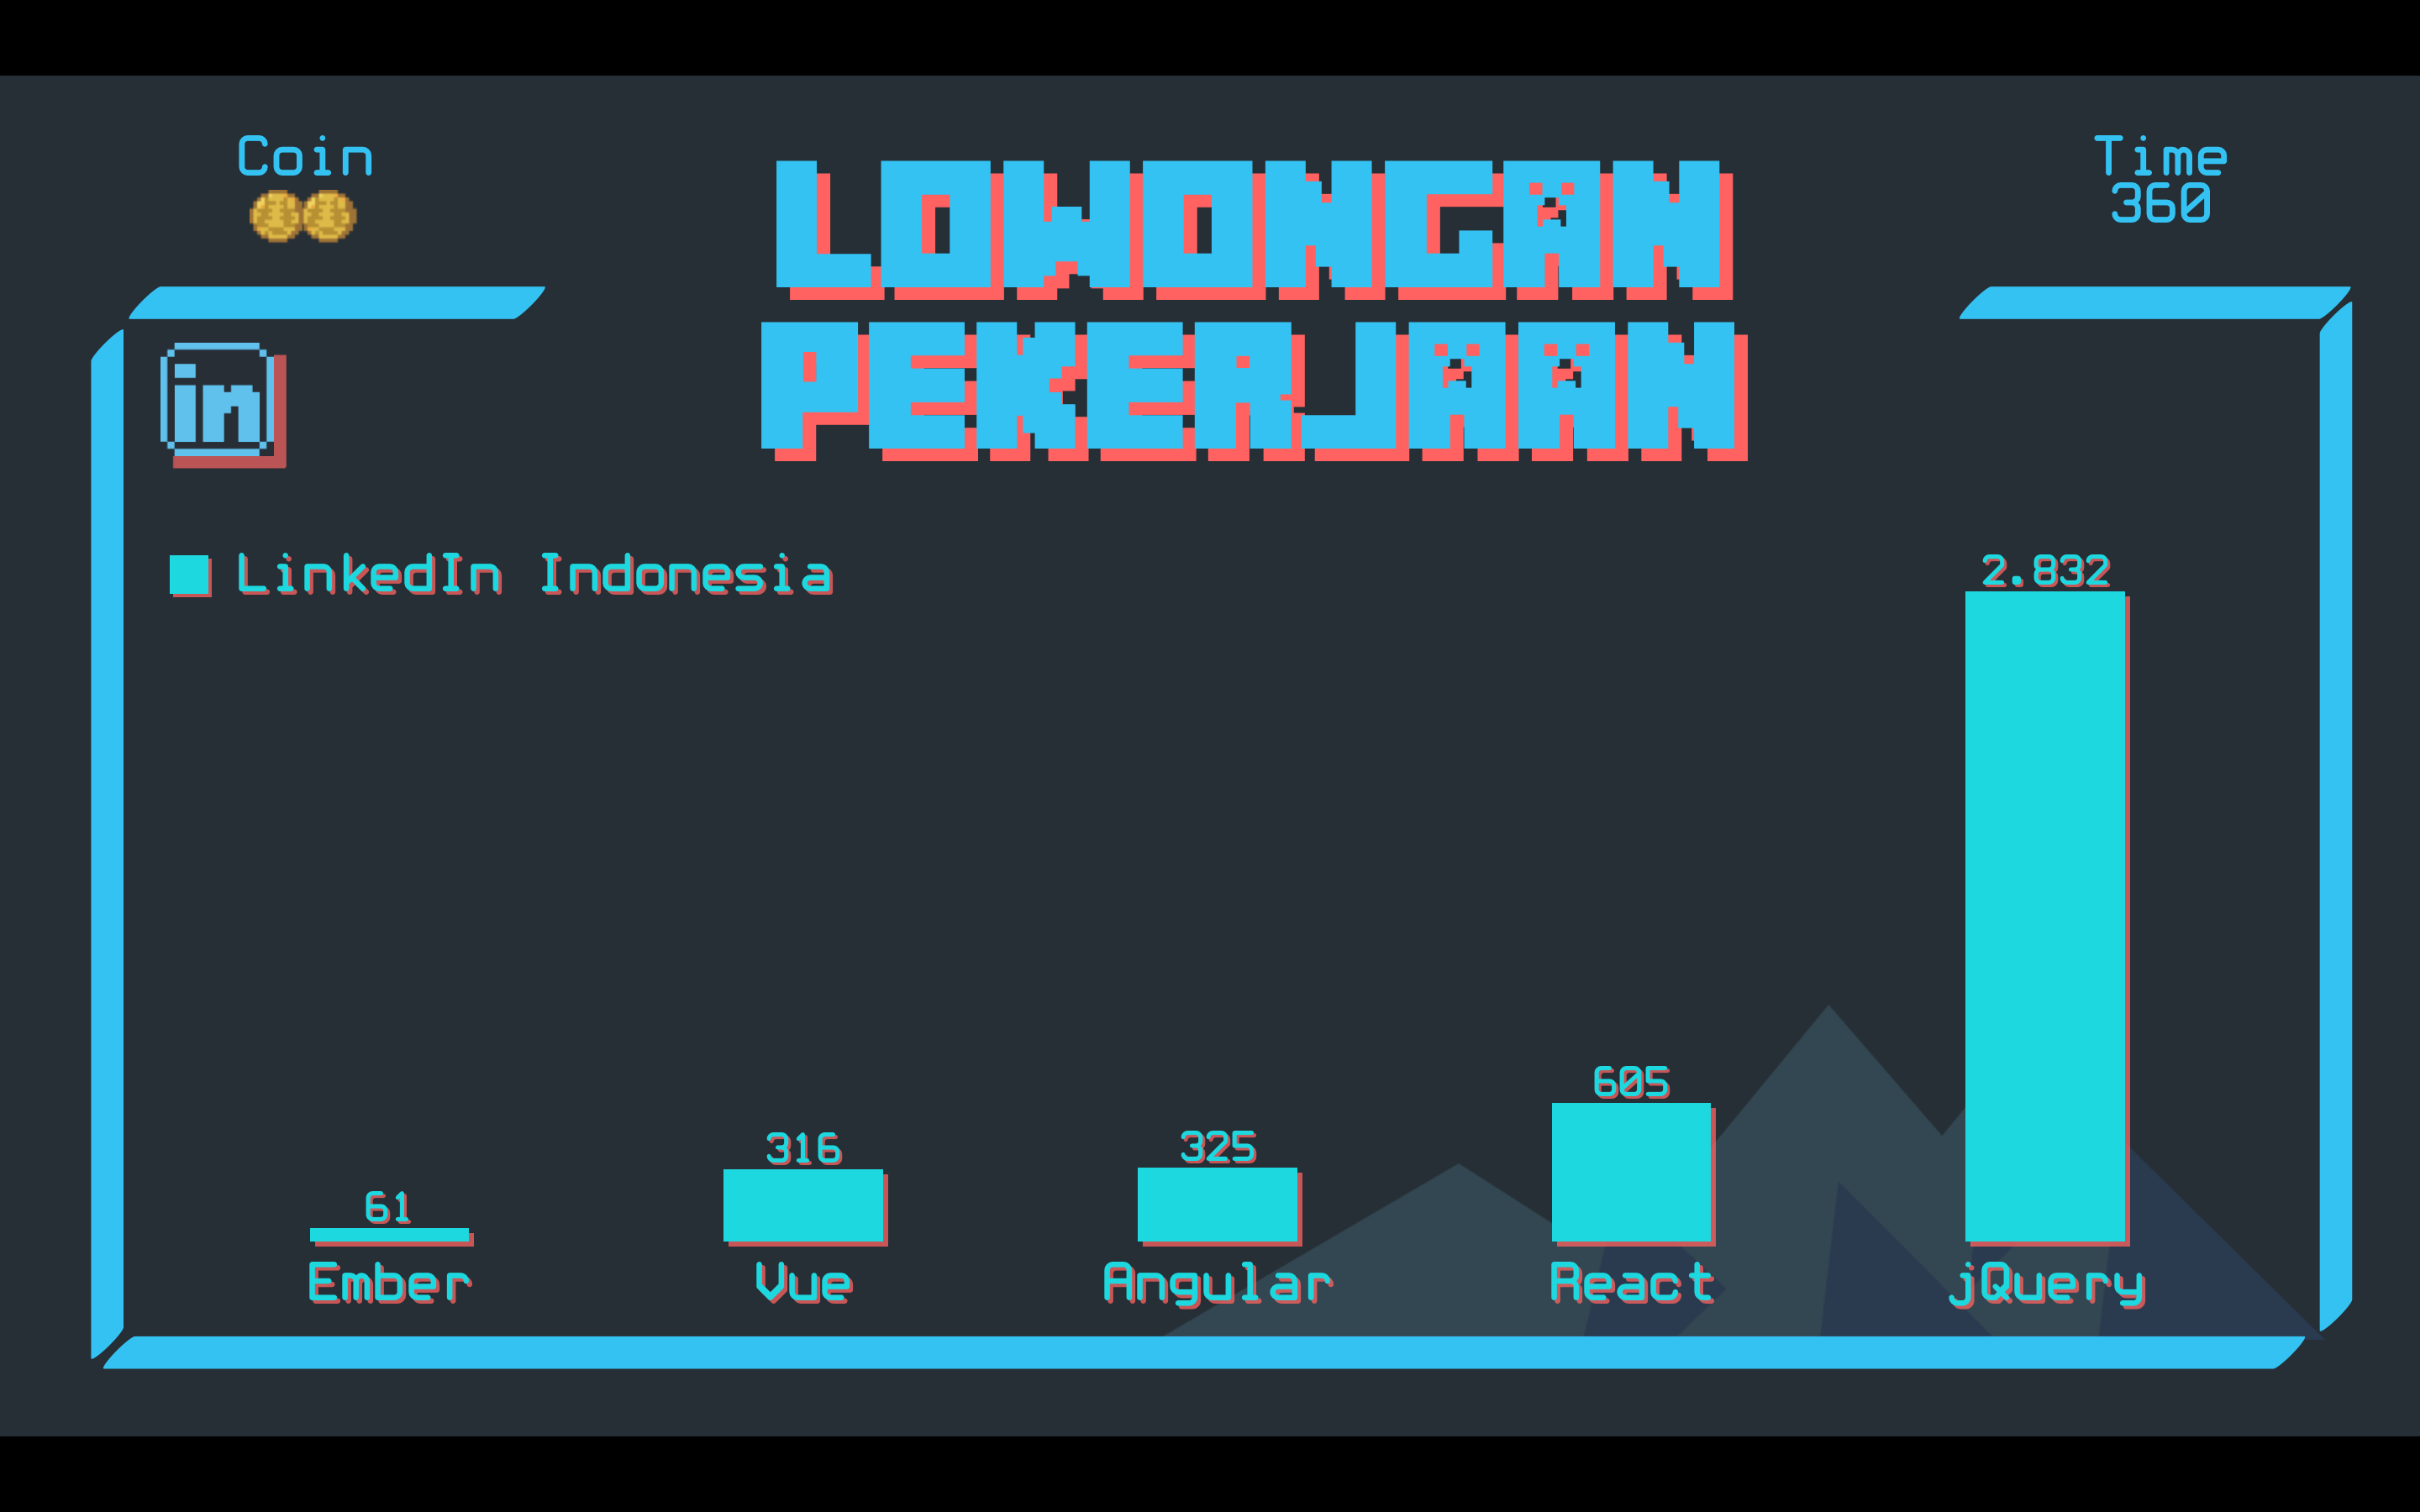 Number of job vacancies posted in LinkedIn Indonesia